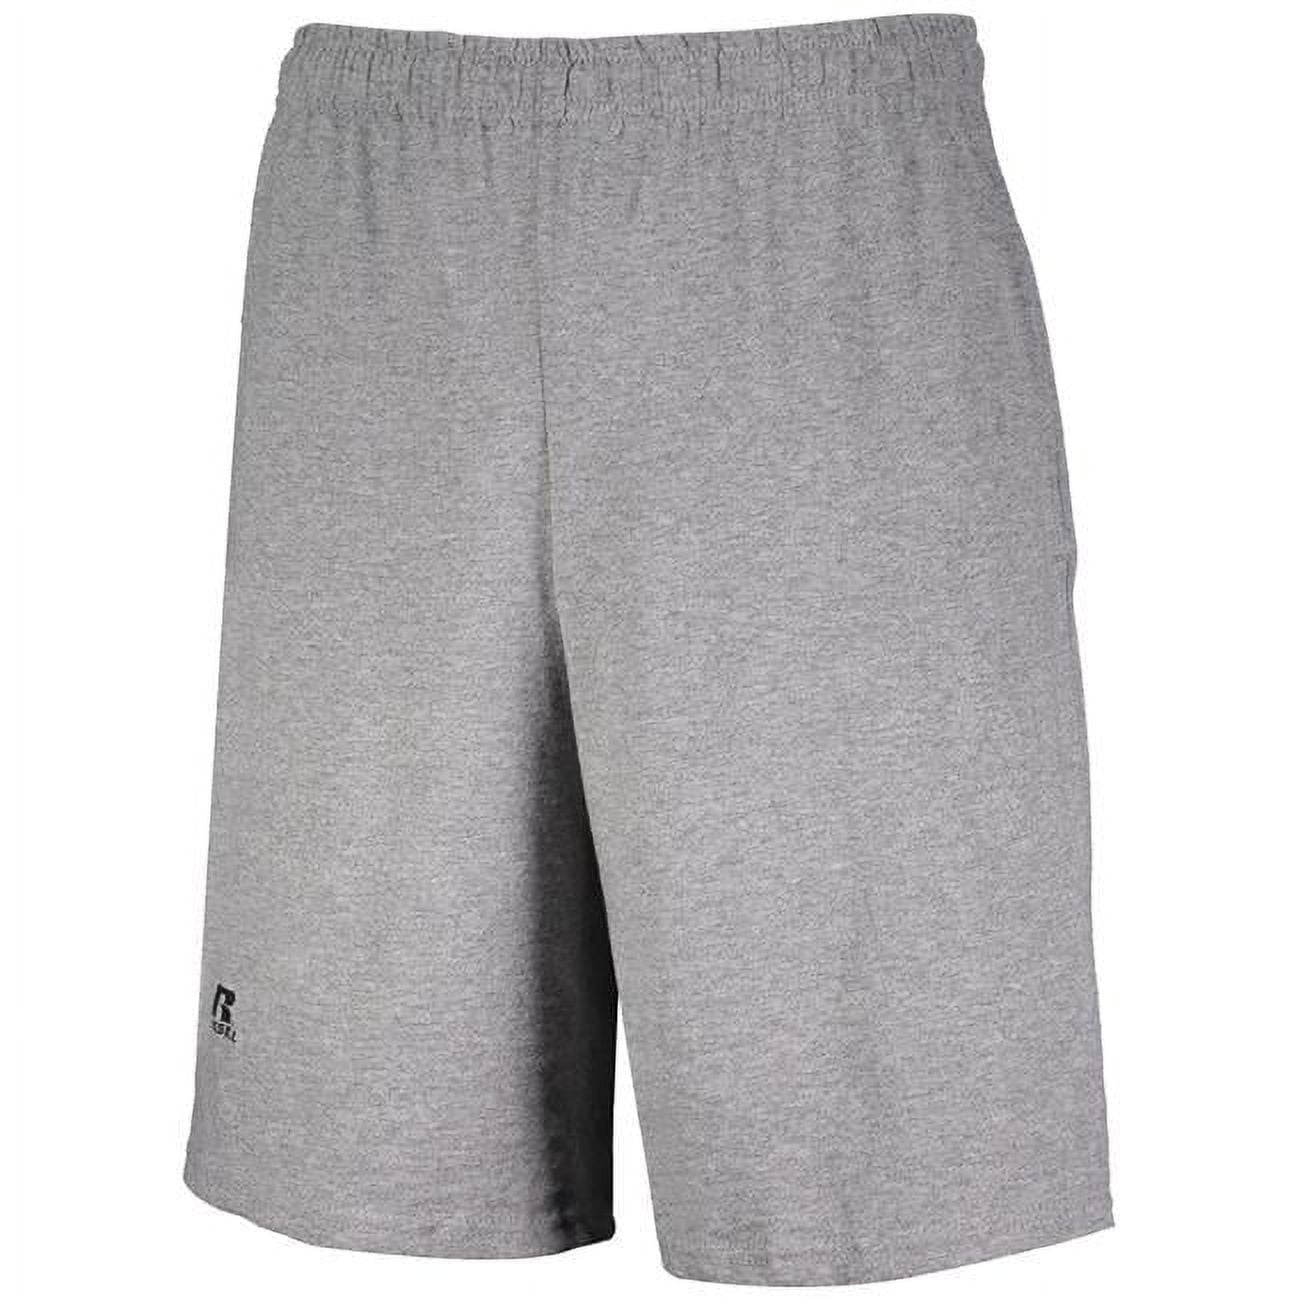 Russell Athletic Men's and Big Men's Basic Cotton Pocket Shorts ...